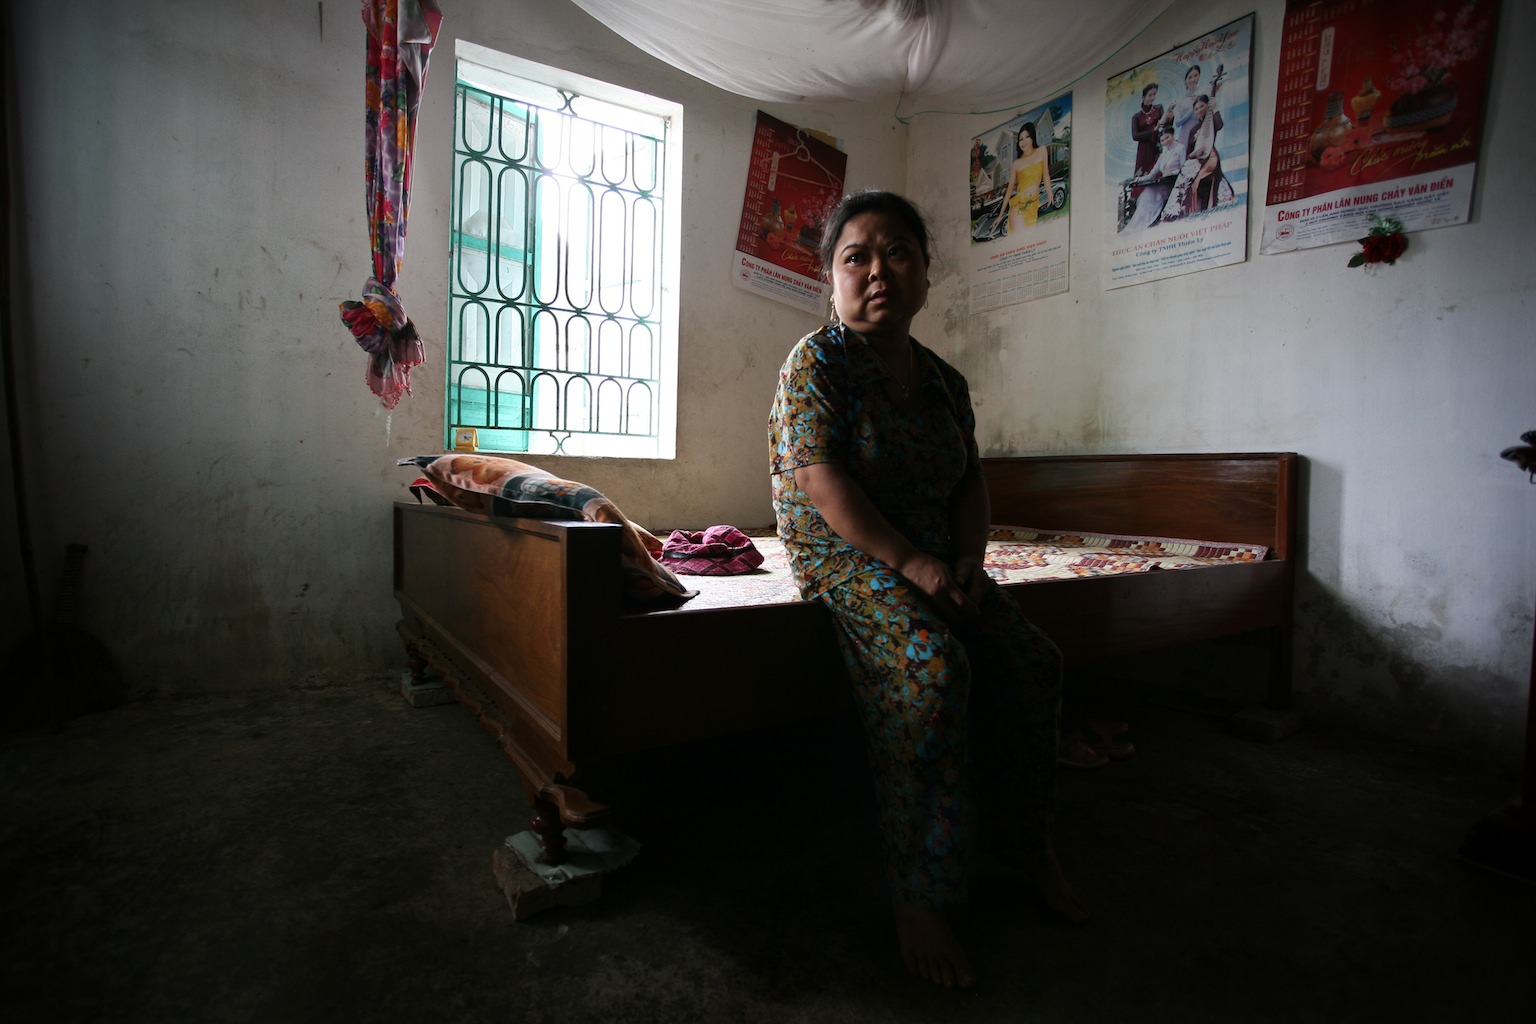 Standing about a metre tall, Mai Thi, 28, Agent Orange victim, patiently waits for her mothers return to comfort her in the bedroom of their home in the Kim Dong district of Nhat Tan, Vietnam.